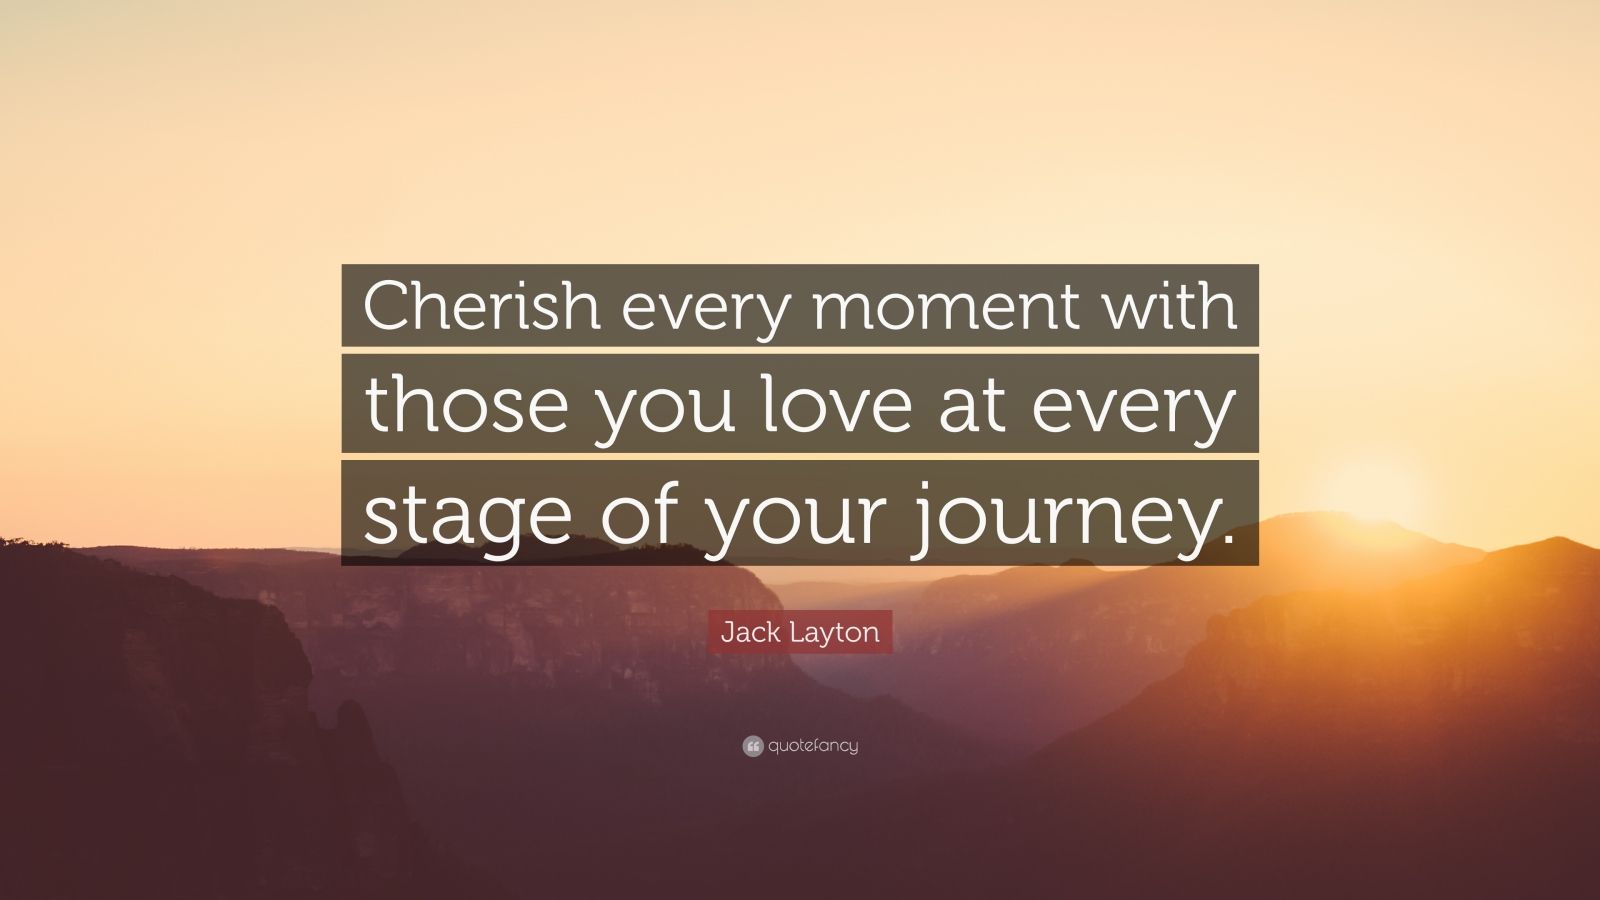 Jack Layton Quote: “Cherish every moment with those you love at every ...